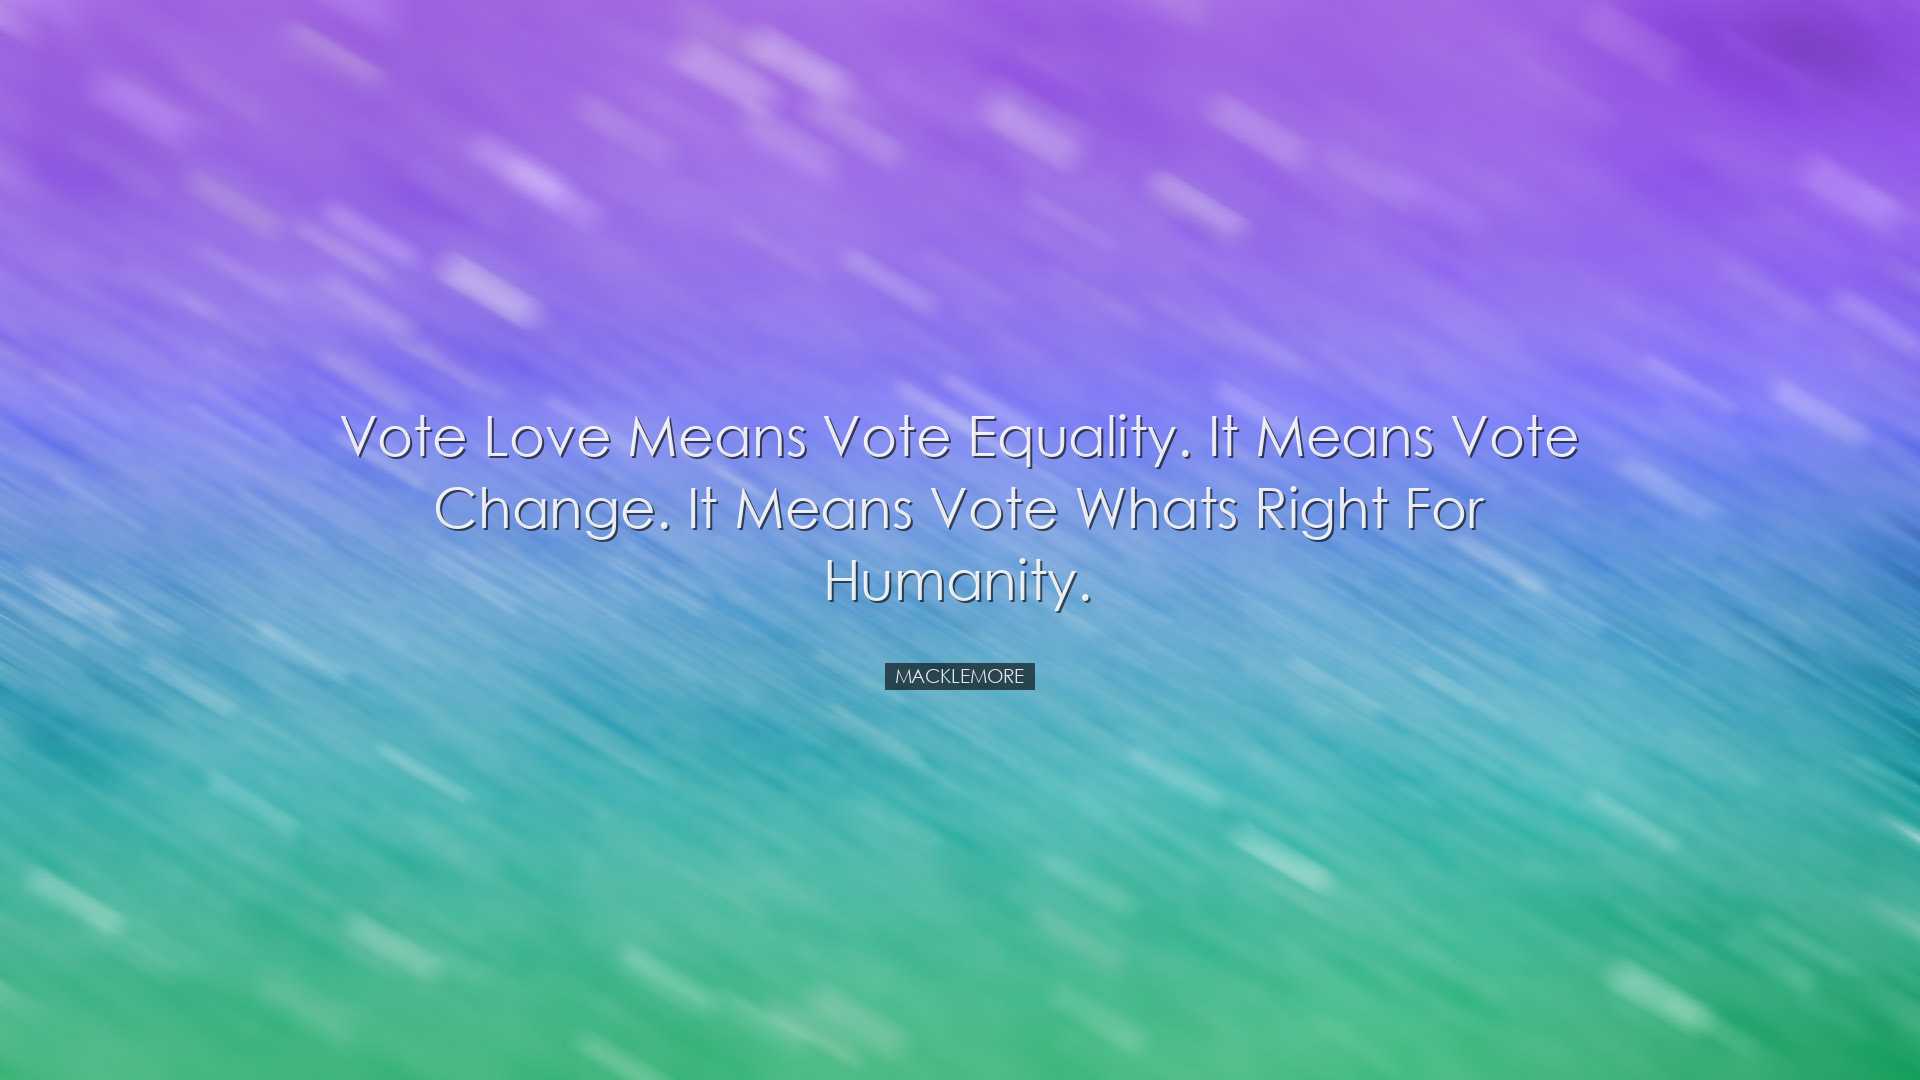 Vote Love means vote equality. It means vote change. It means vote